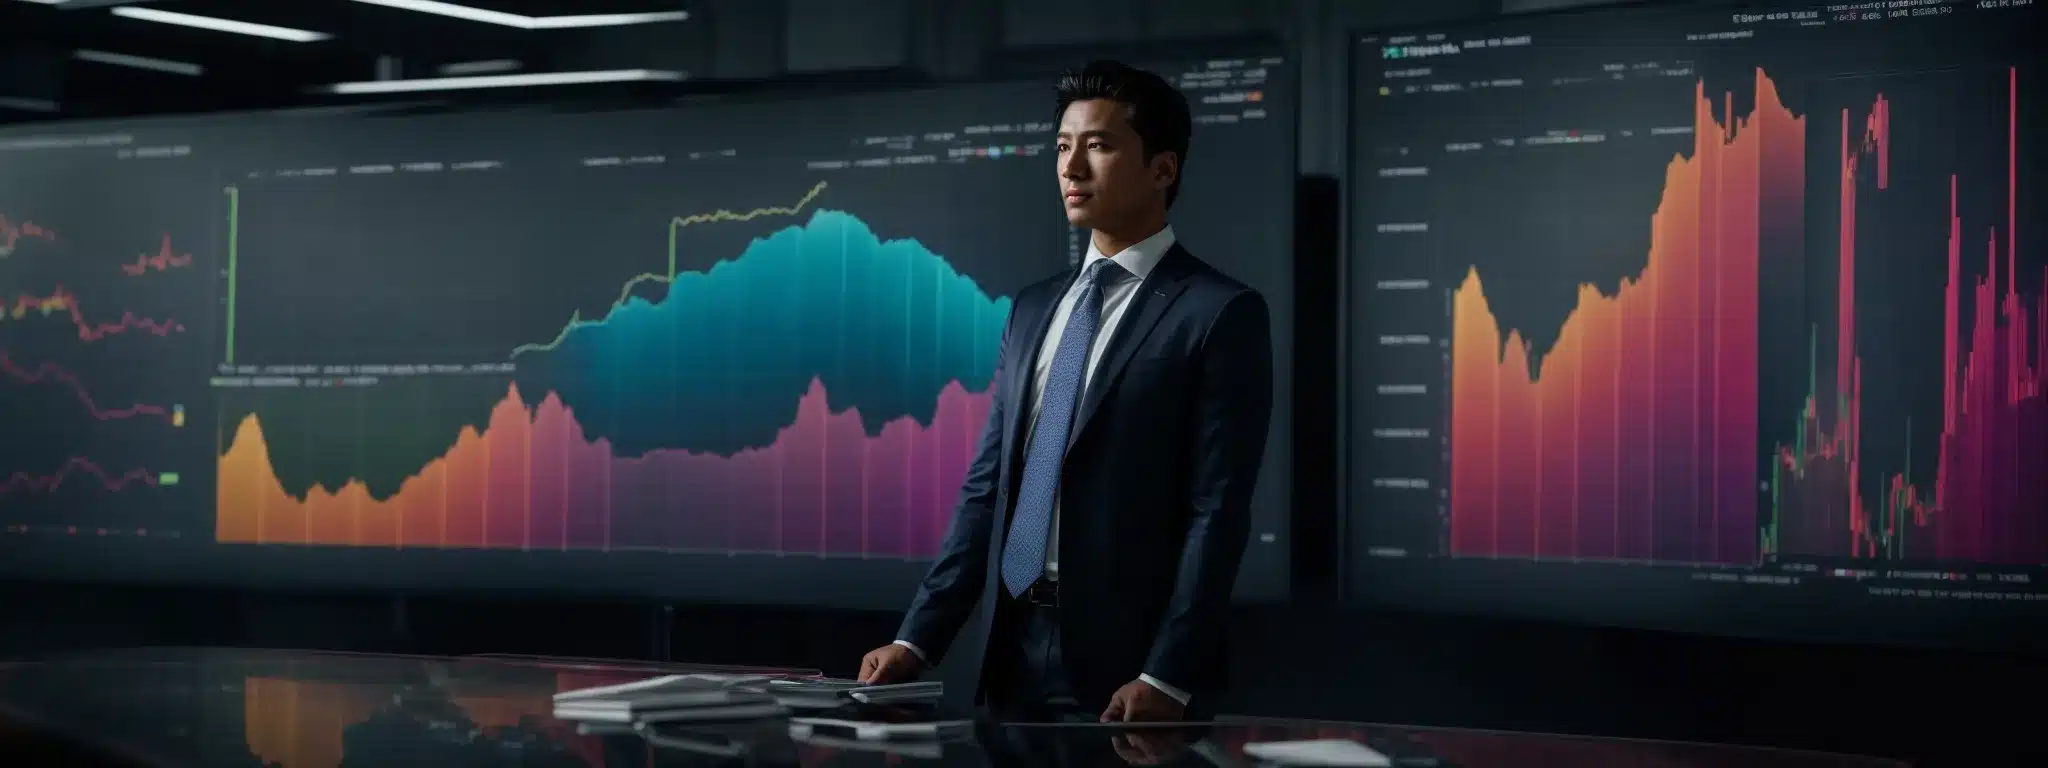 A Confident Business Professional Stands Before A Large Screen Displaying Colorful Graphs And Charts Analyzing Market Trends.